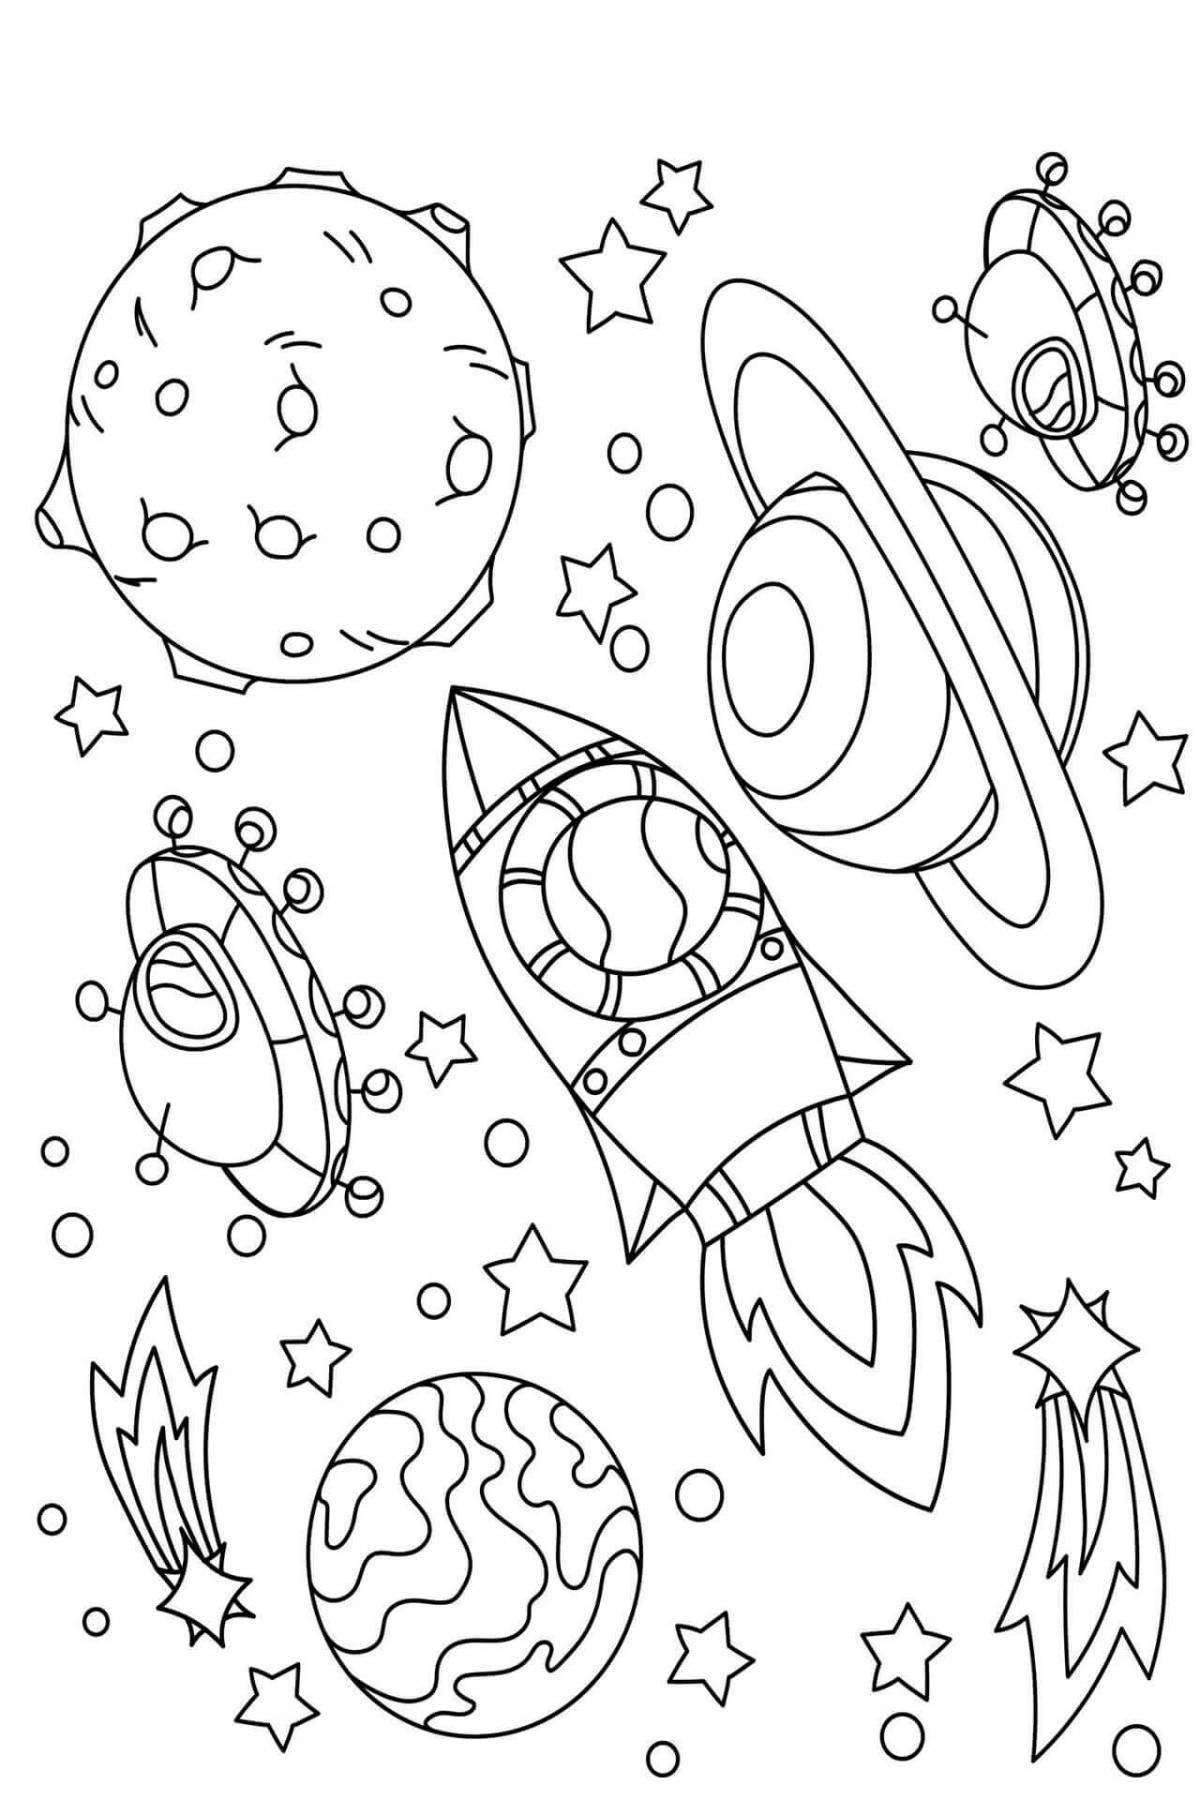 Charming space by number coloring book